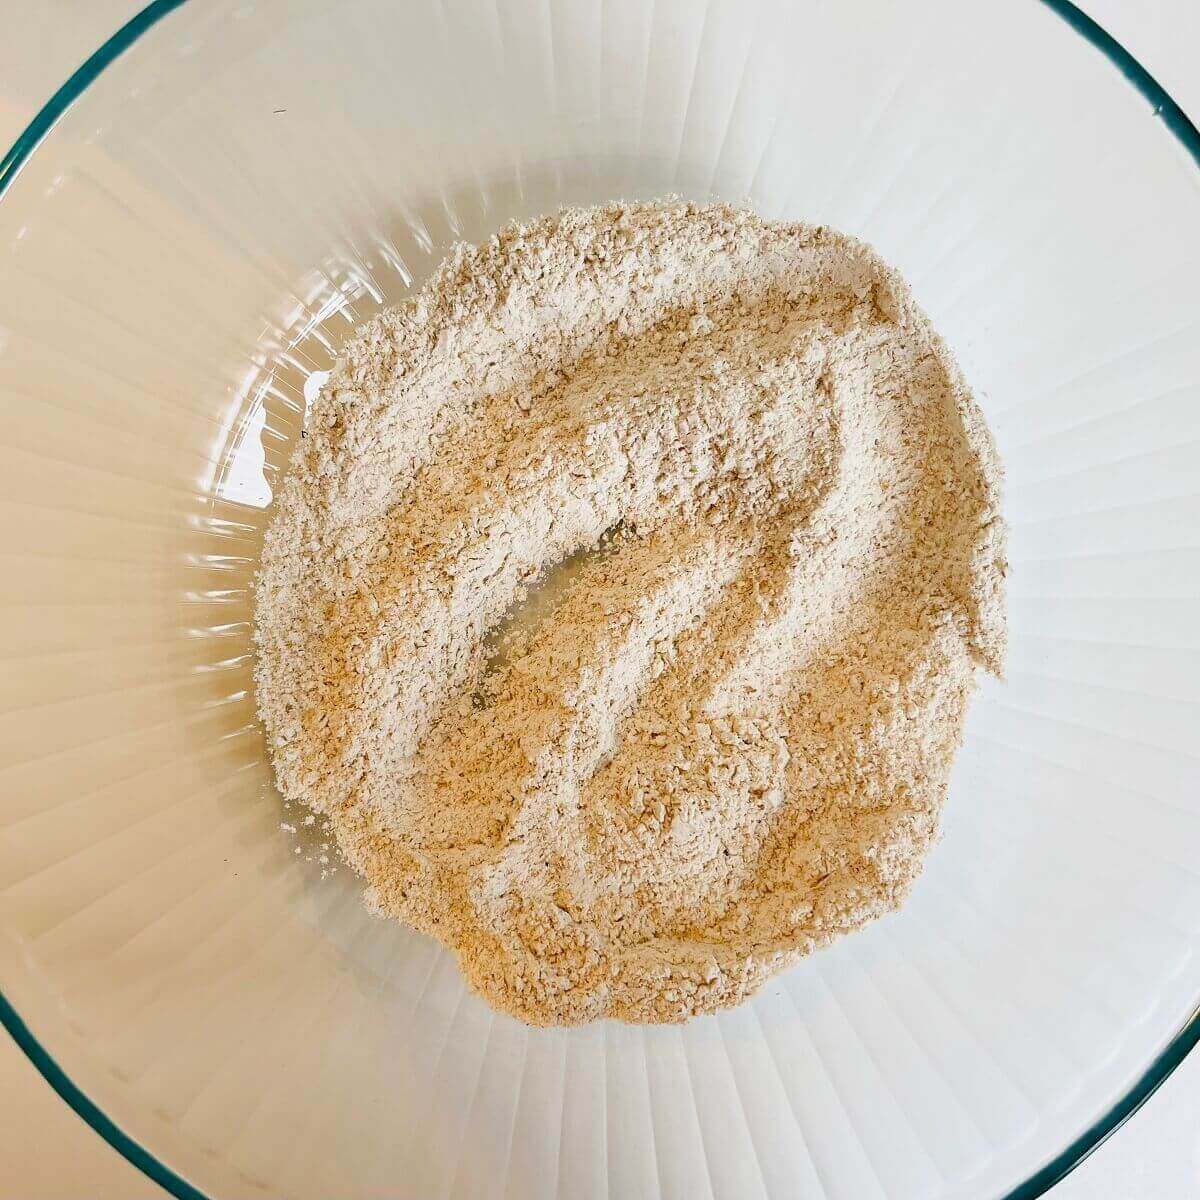 Flour and baking powder in a glass mixing bowl.